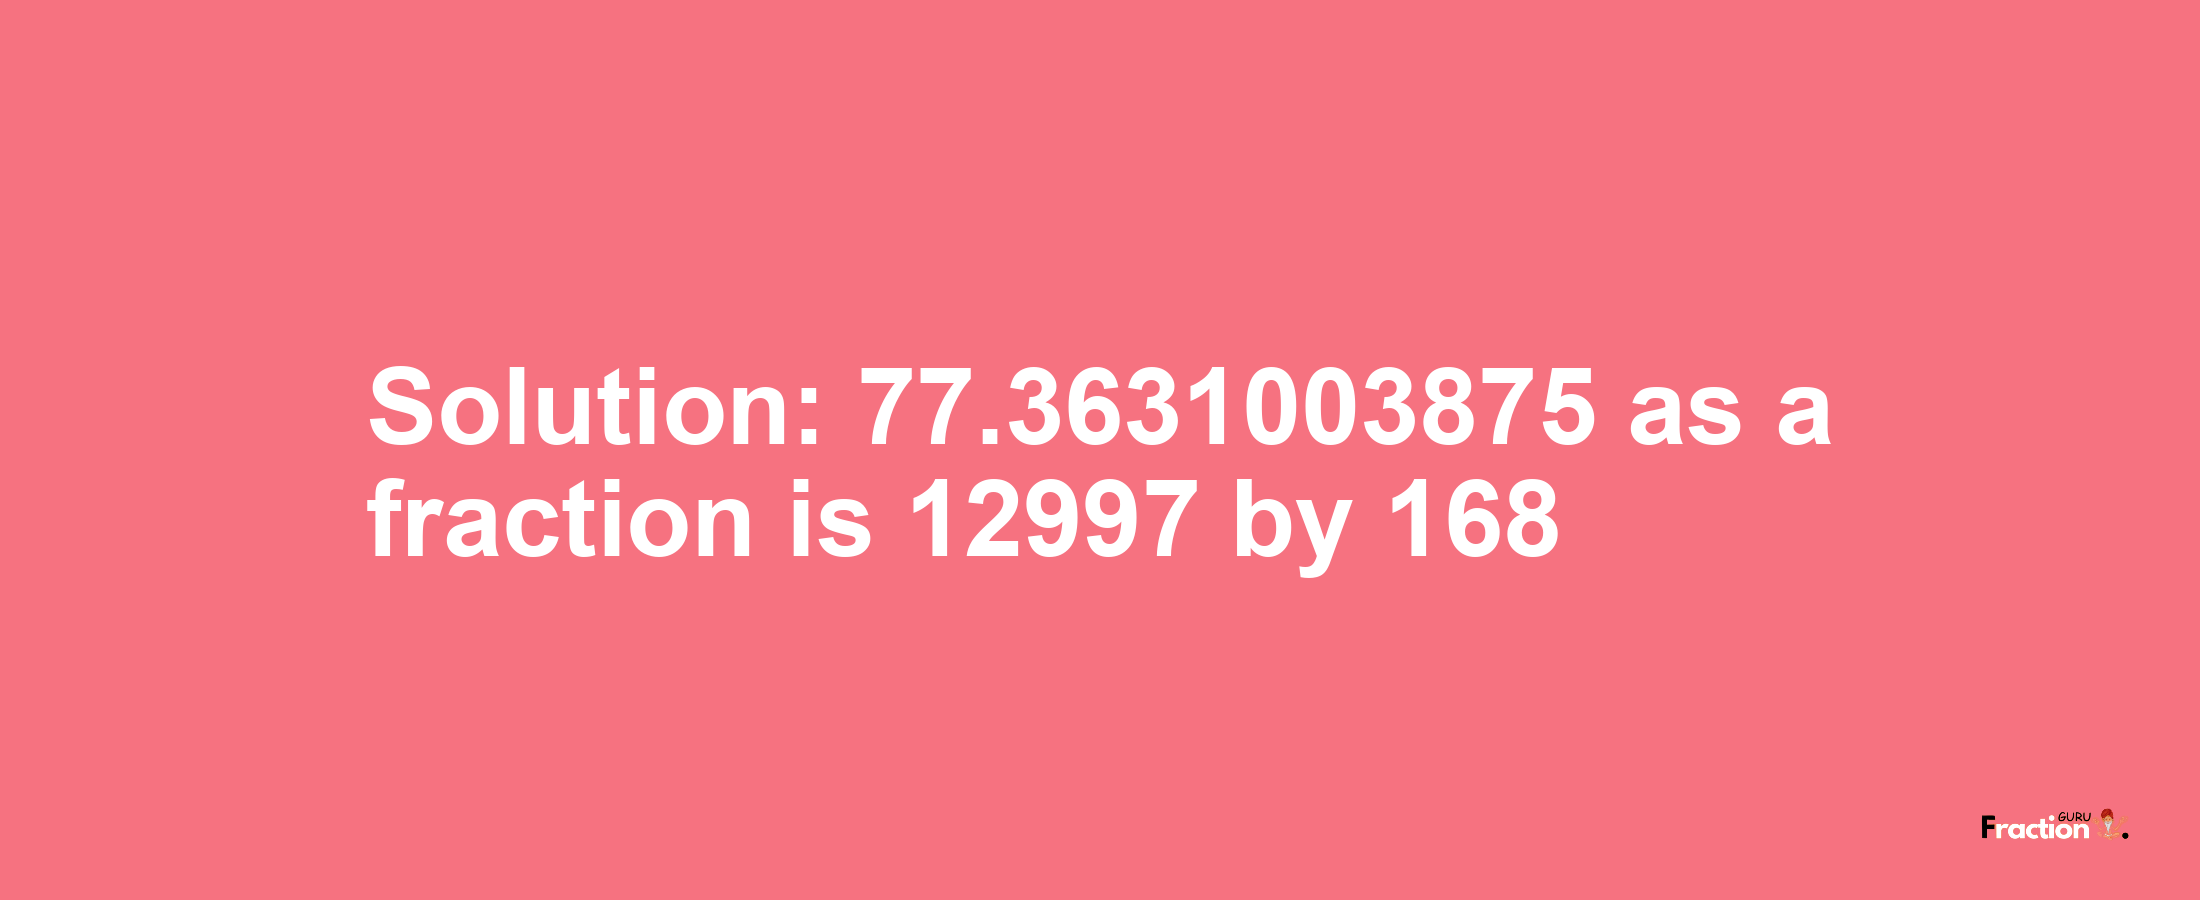 Solution:77.3631003875 as a fraction is 12997/168